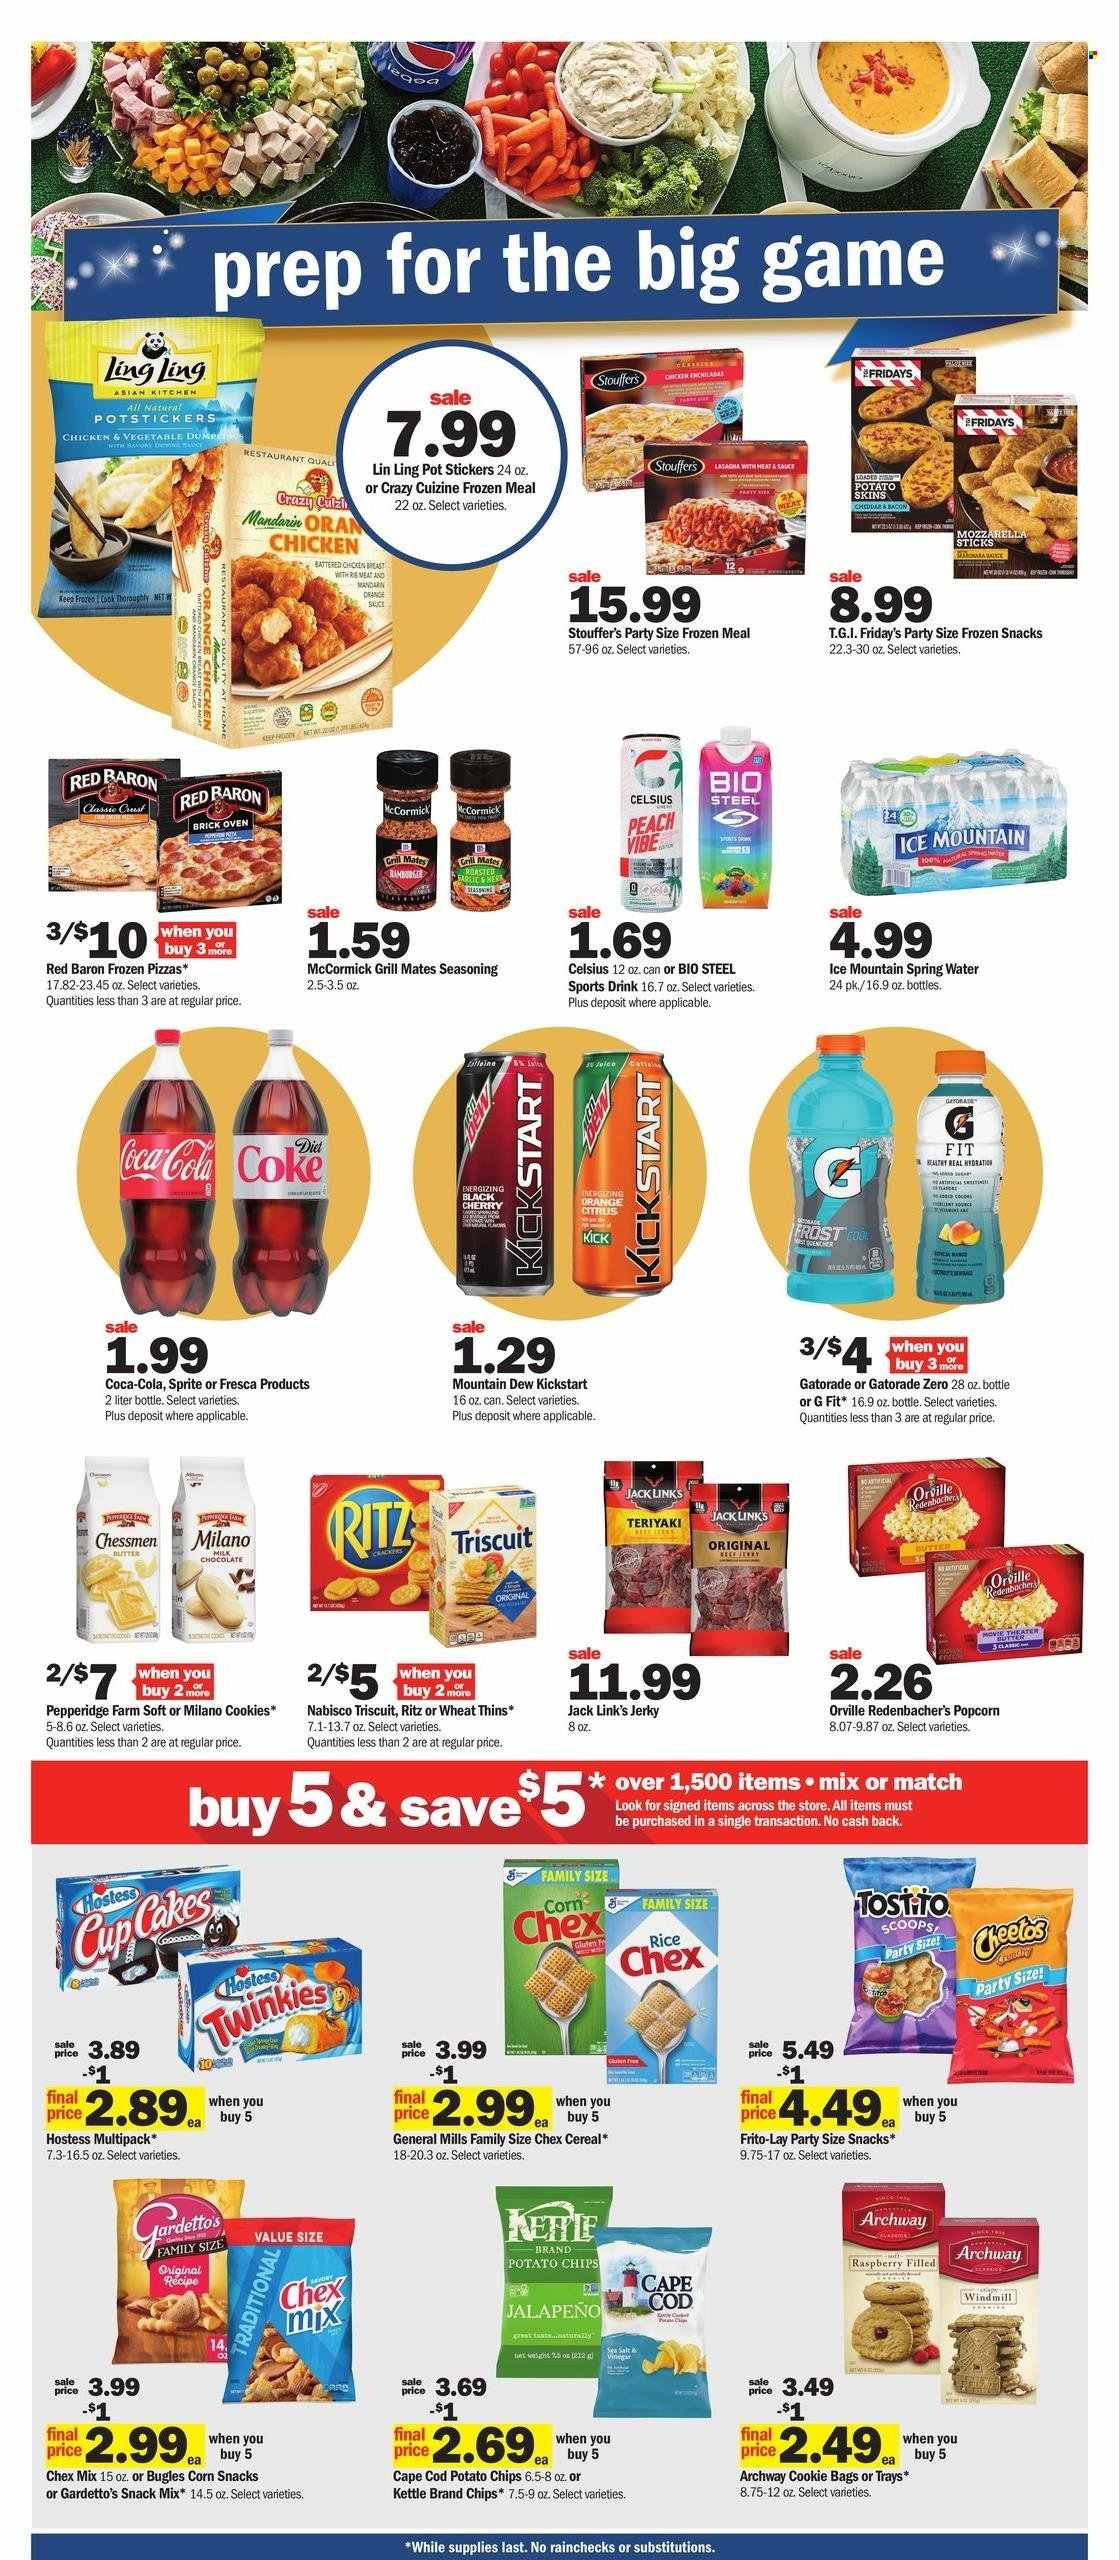 thumbnail - Meijer Flyer - 01/29/2023 - 02/04/2023 - Sales products - jalapeño, mandarines, cherries, oranges, cod, pizza, sauce, lasagna meal, bacon, jerky, mozzarella, cheese, Stouffer's, Red Baron, cookies, chocolate, snack, RITZ, potato chips, Cheetos, Thins, popcorn, Frito-Lay, Jack Link's, Chex Mix, cereals, rice, spice, Coca-Cola, Mountain Dew, Sprite, Gatorade, spring water, Ice Mountain, Crest, bag, pot, sticker, oven, grill. Page 5.